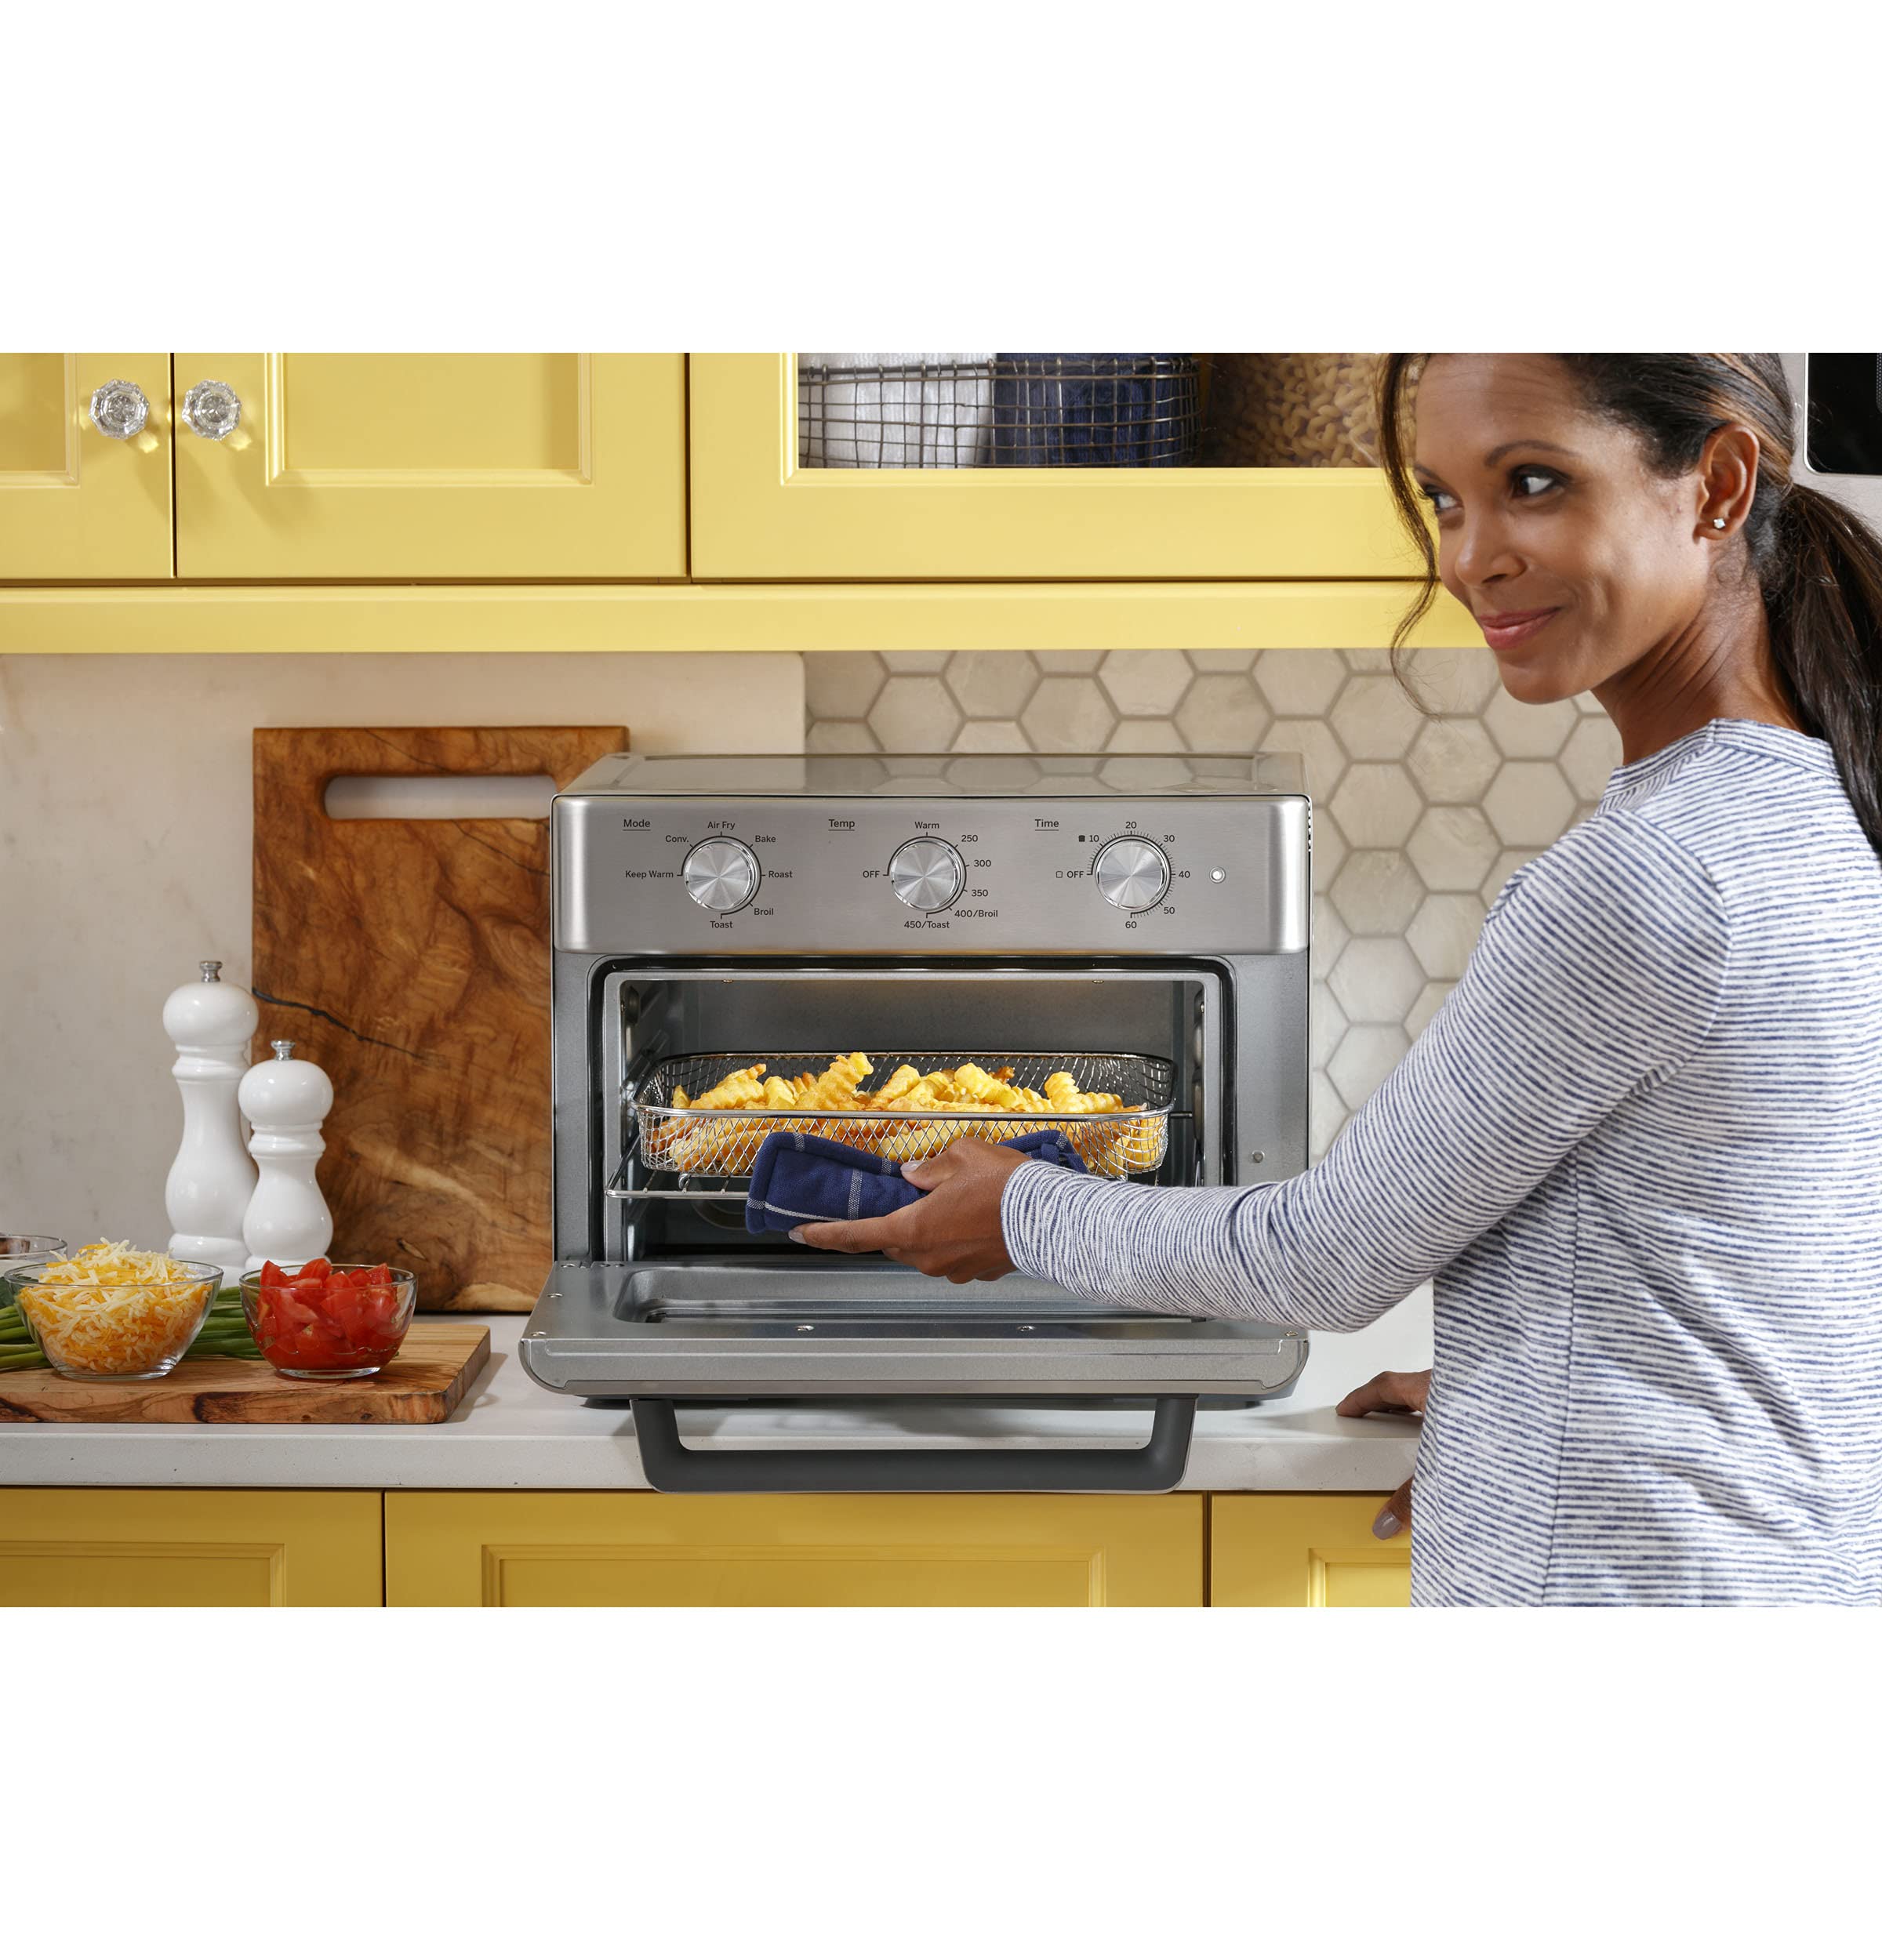 GE Mechanical Air Fryer Toaster Oven + Accessory Set | Convection Toaster with 7 Cook Modes | Large Capacity Oven - Fits 12